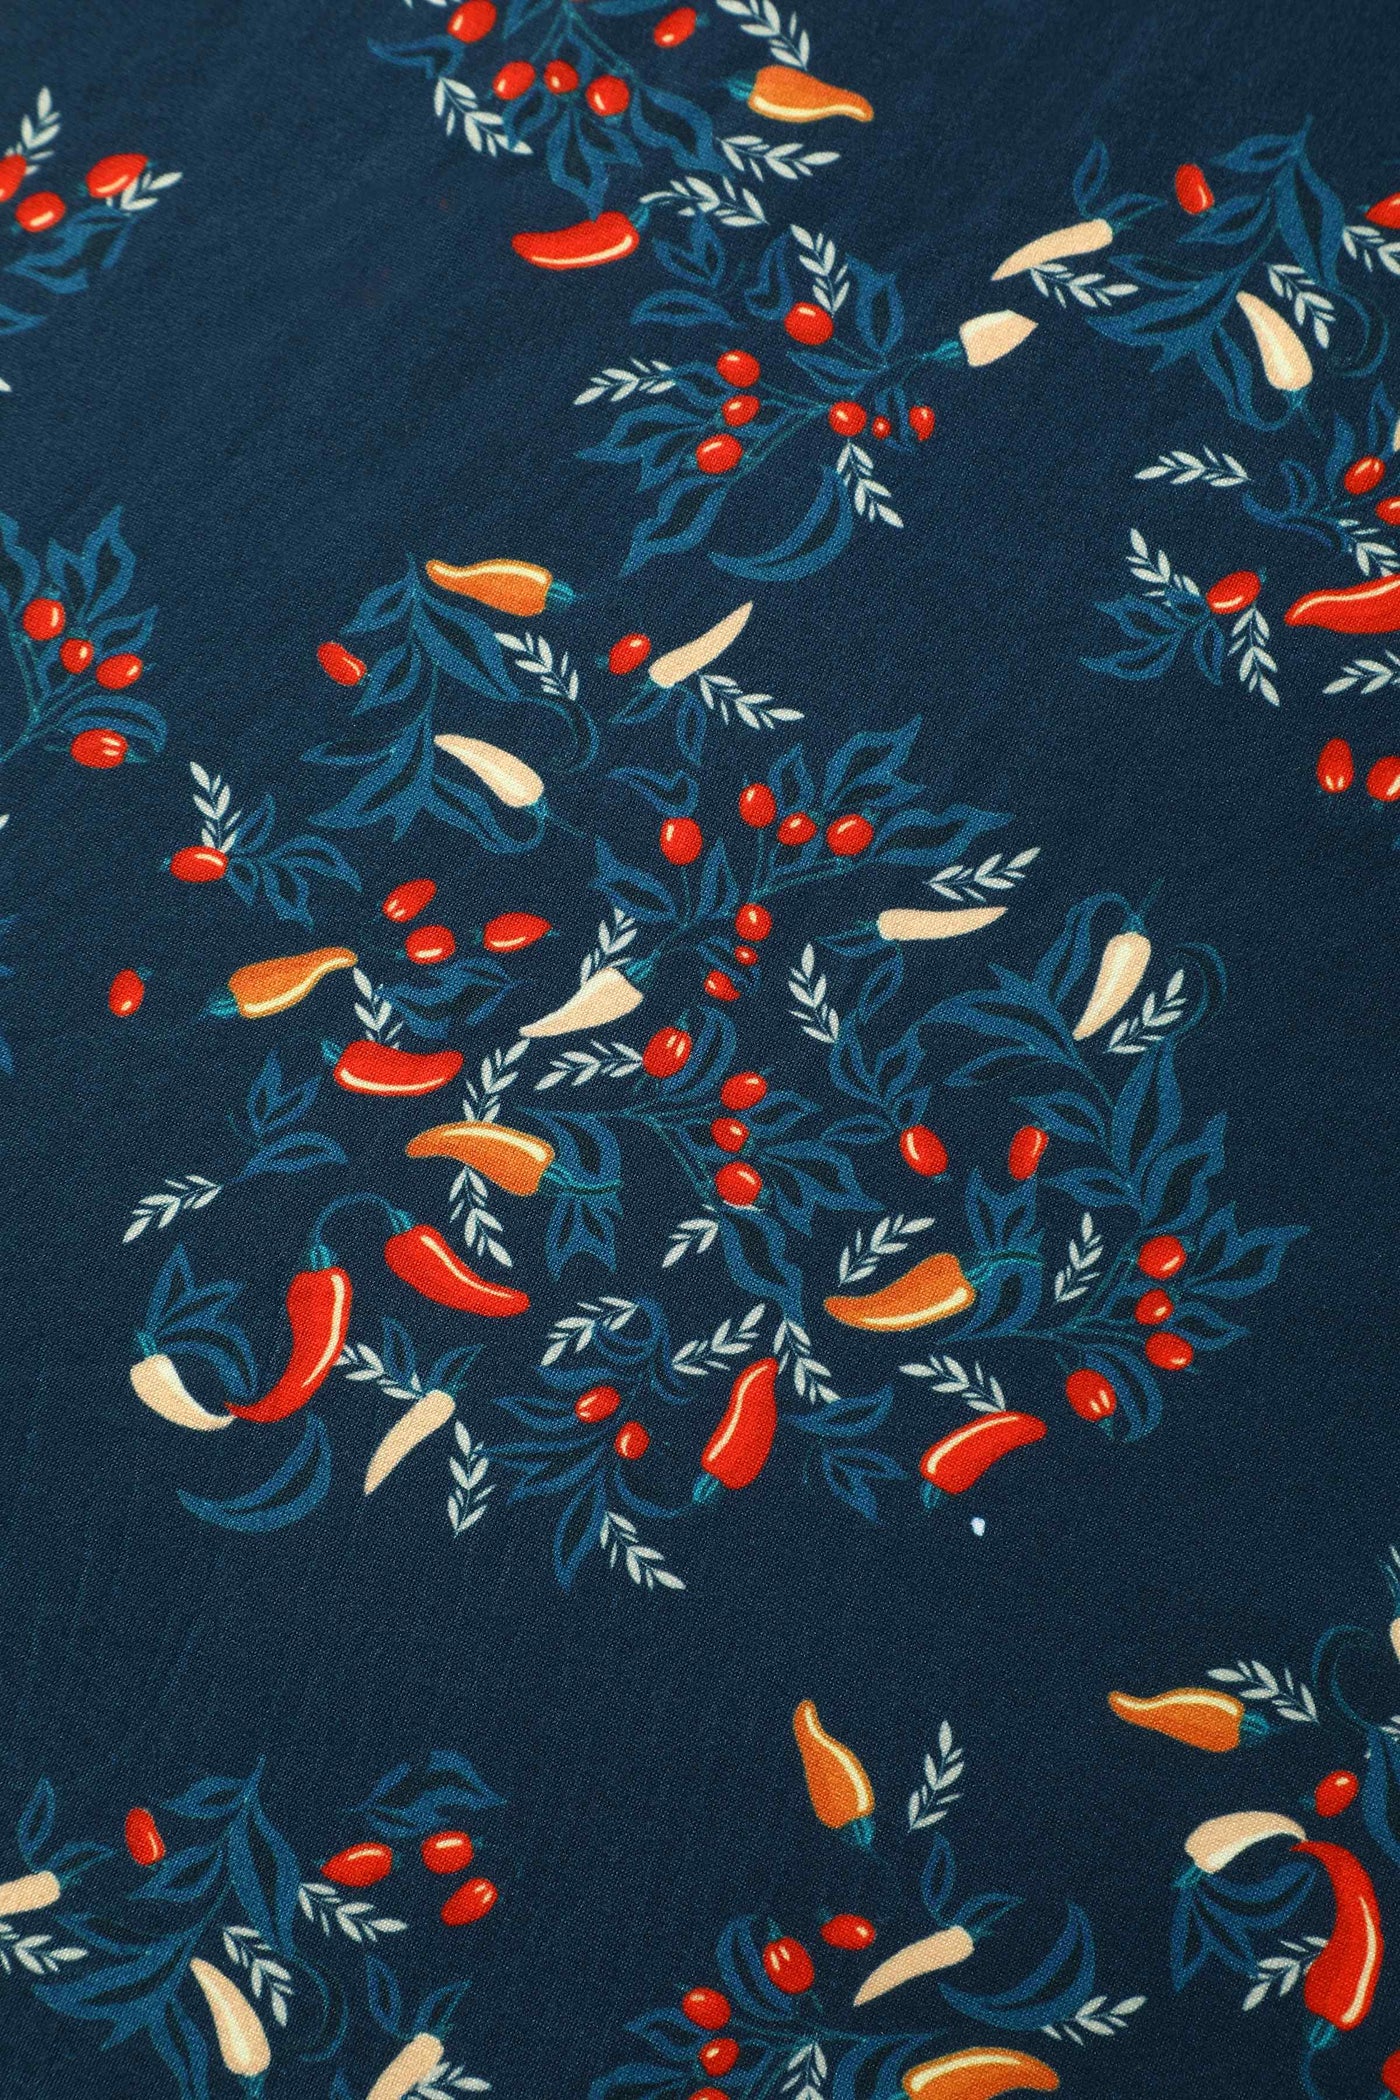 Close up Fabric View of 50s style blue chili print vintage swing dress